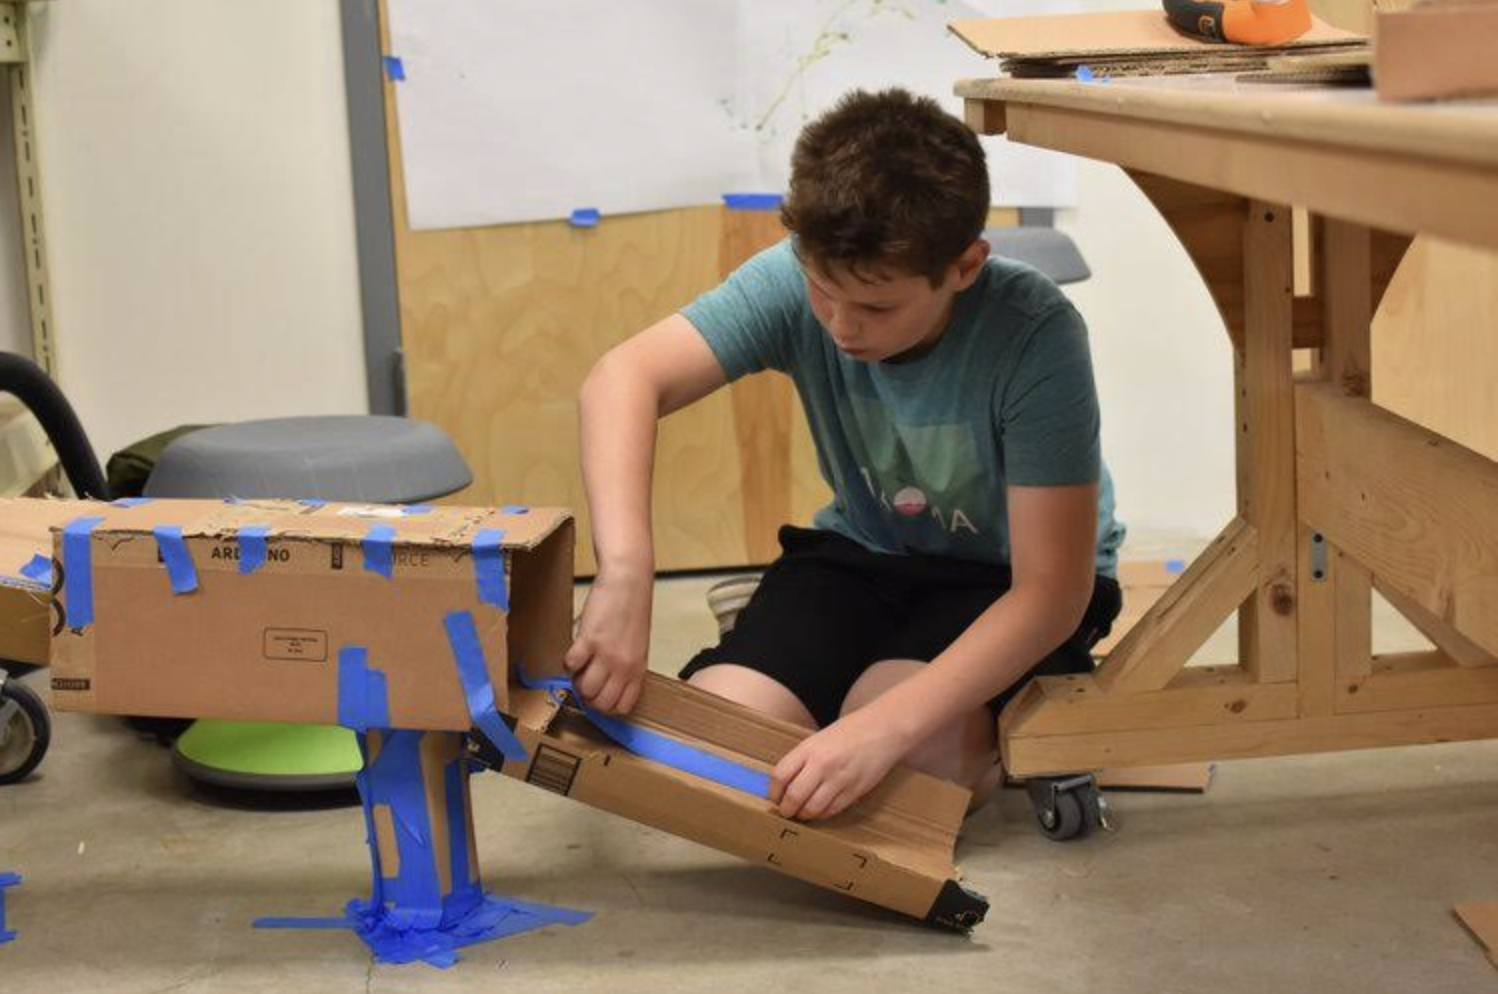 A young person is deeply engaged in building a structure with cardboard and blue tape. They are seated on the floor of a workshop area, surrounded by building materials and tools, demonstrating a hands-on approach to learning and creativity at Court Street Arts.